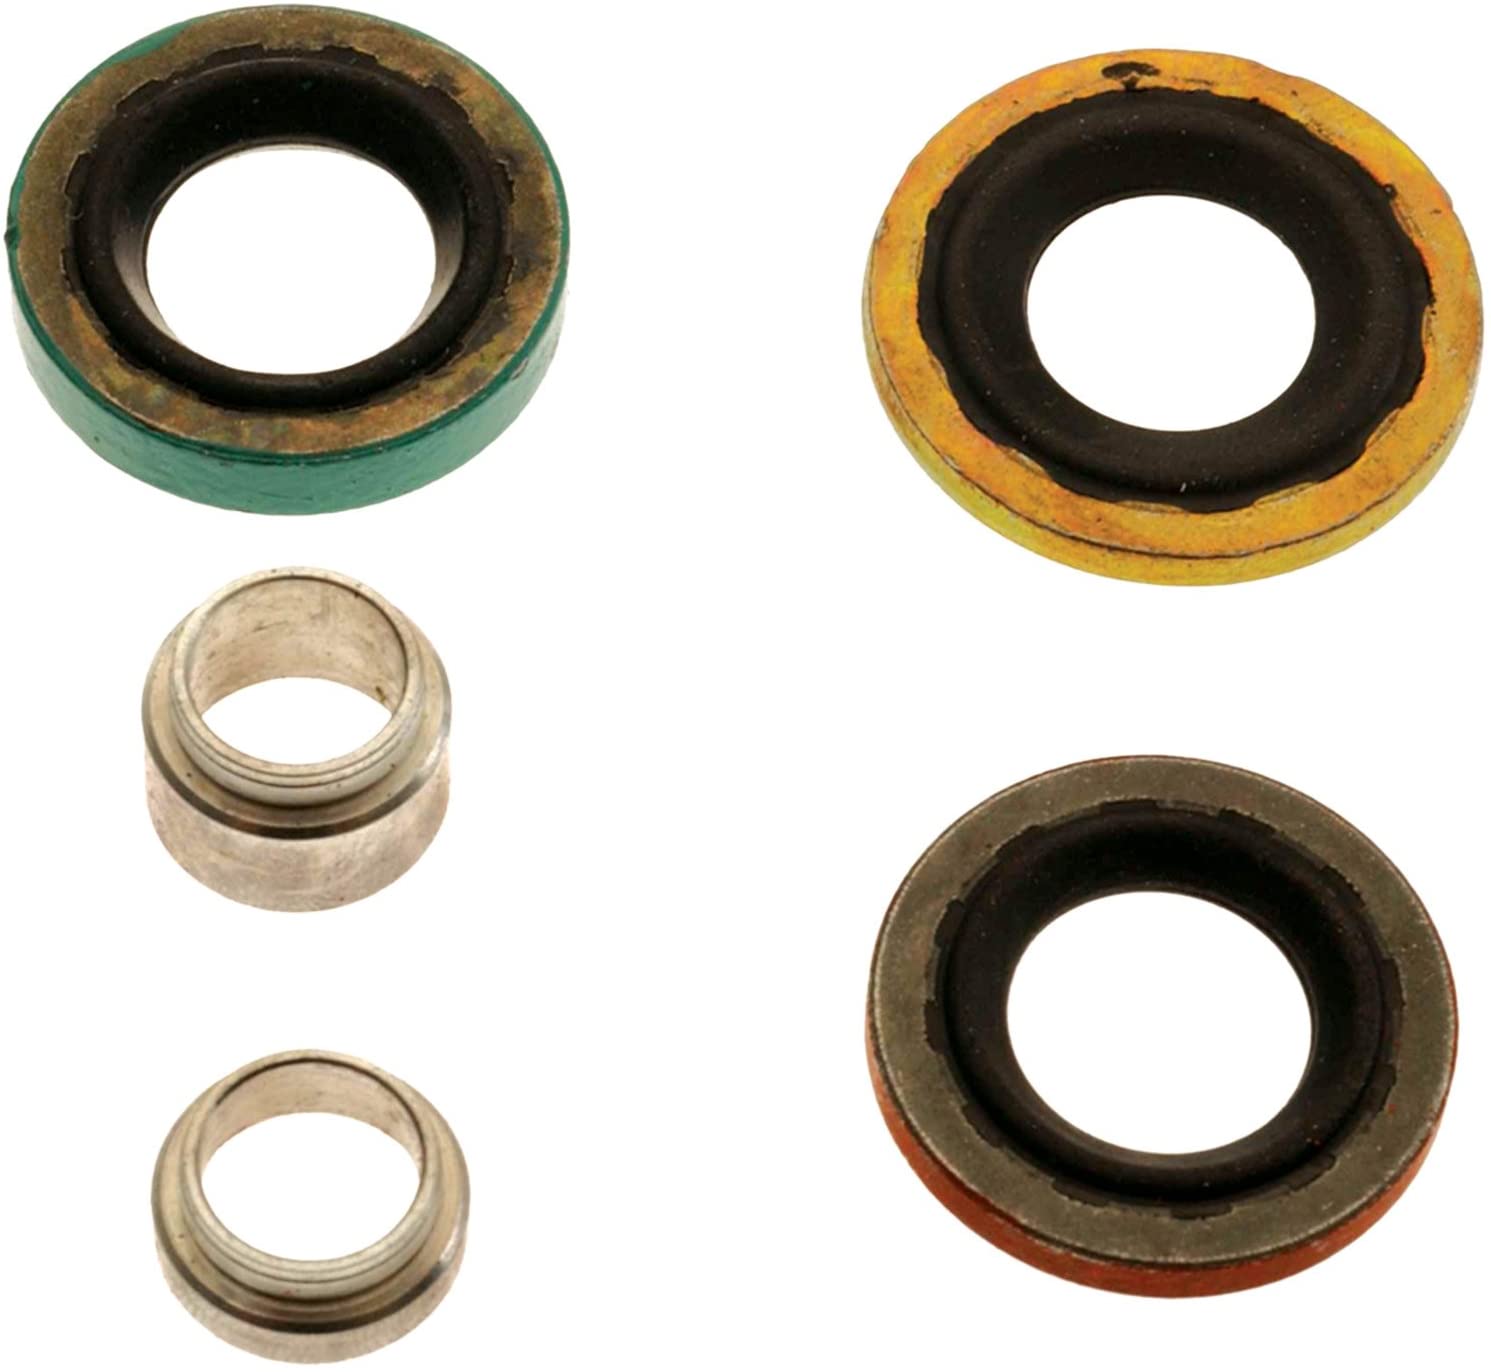 ACDelco 15-20058 GM Original Equipment Air Conditioning Manifold Seal Kit with Compressor and Condenser Seals